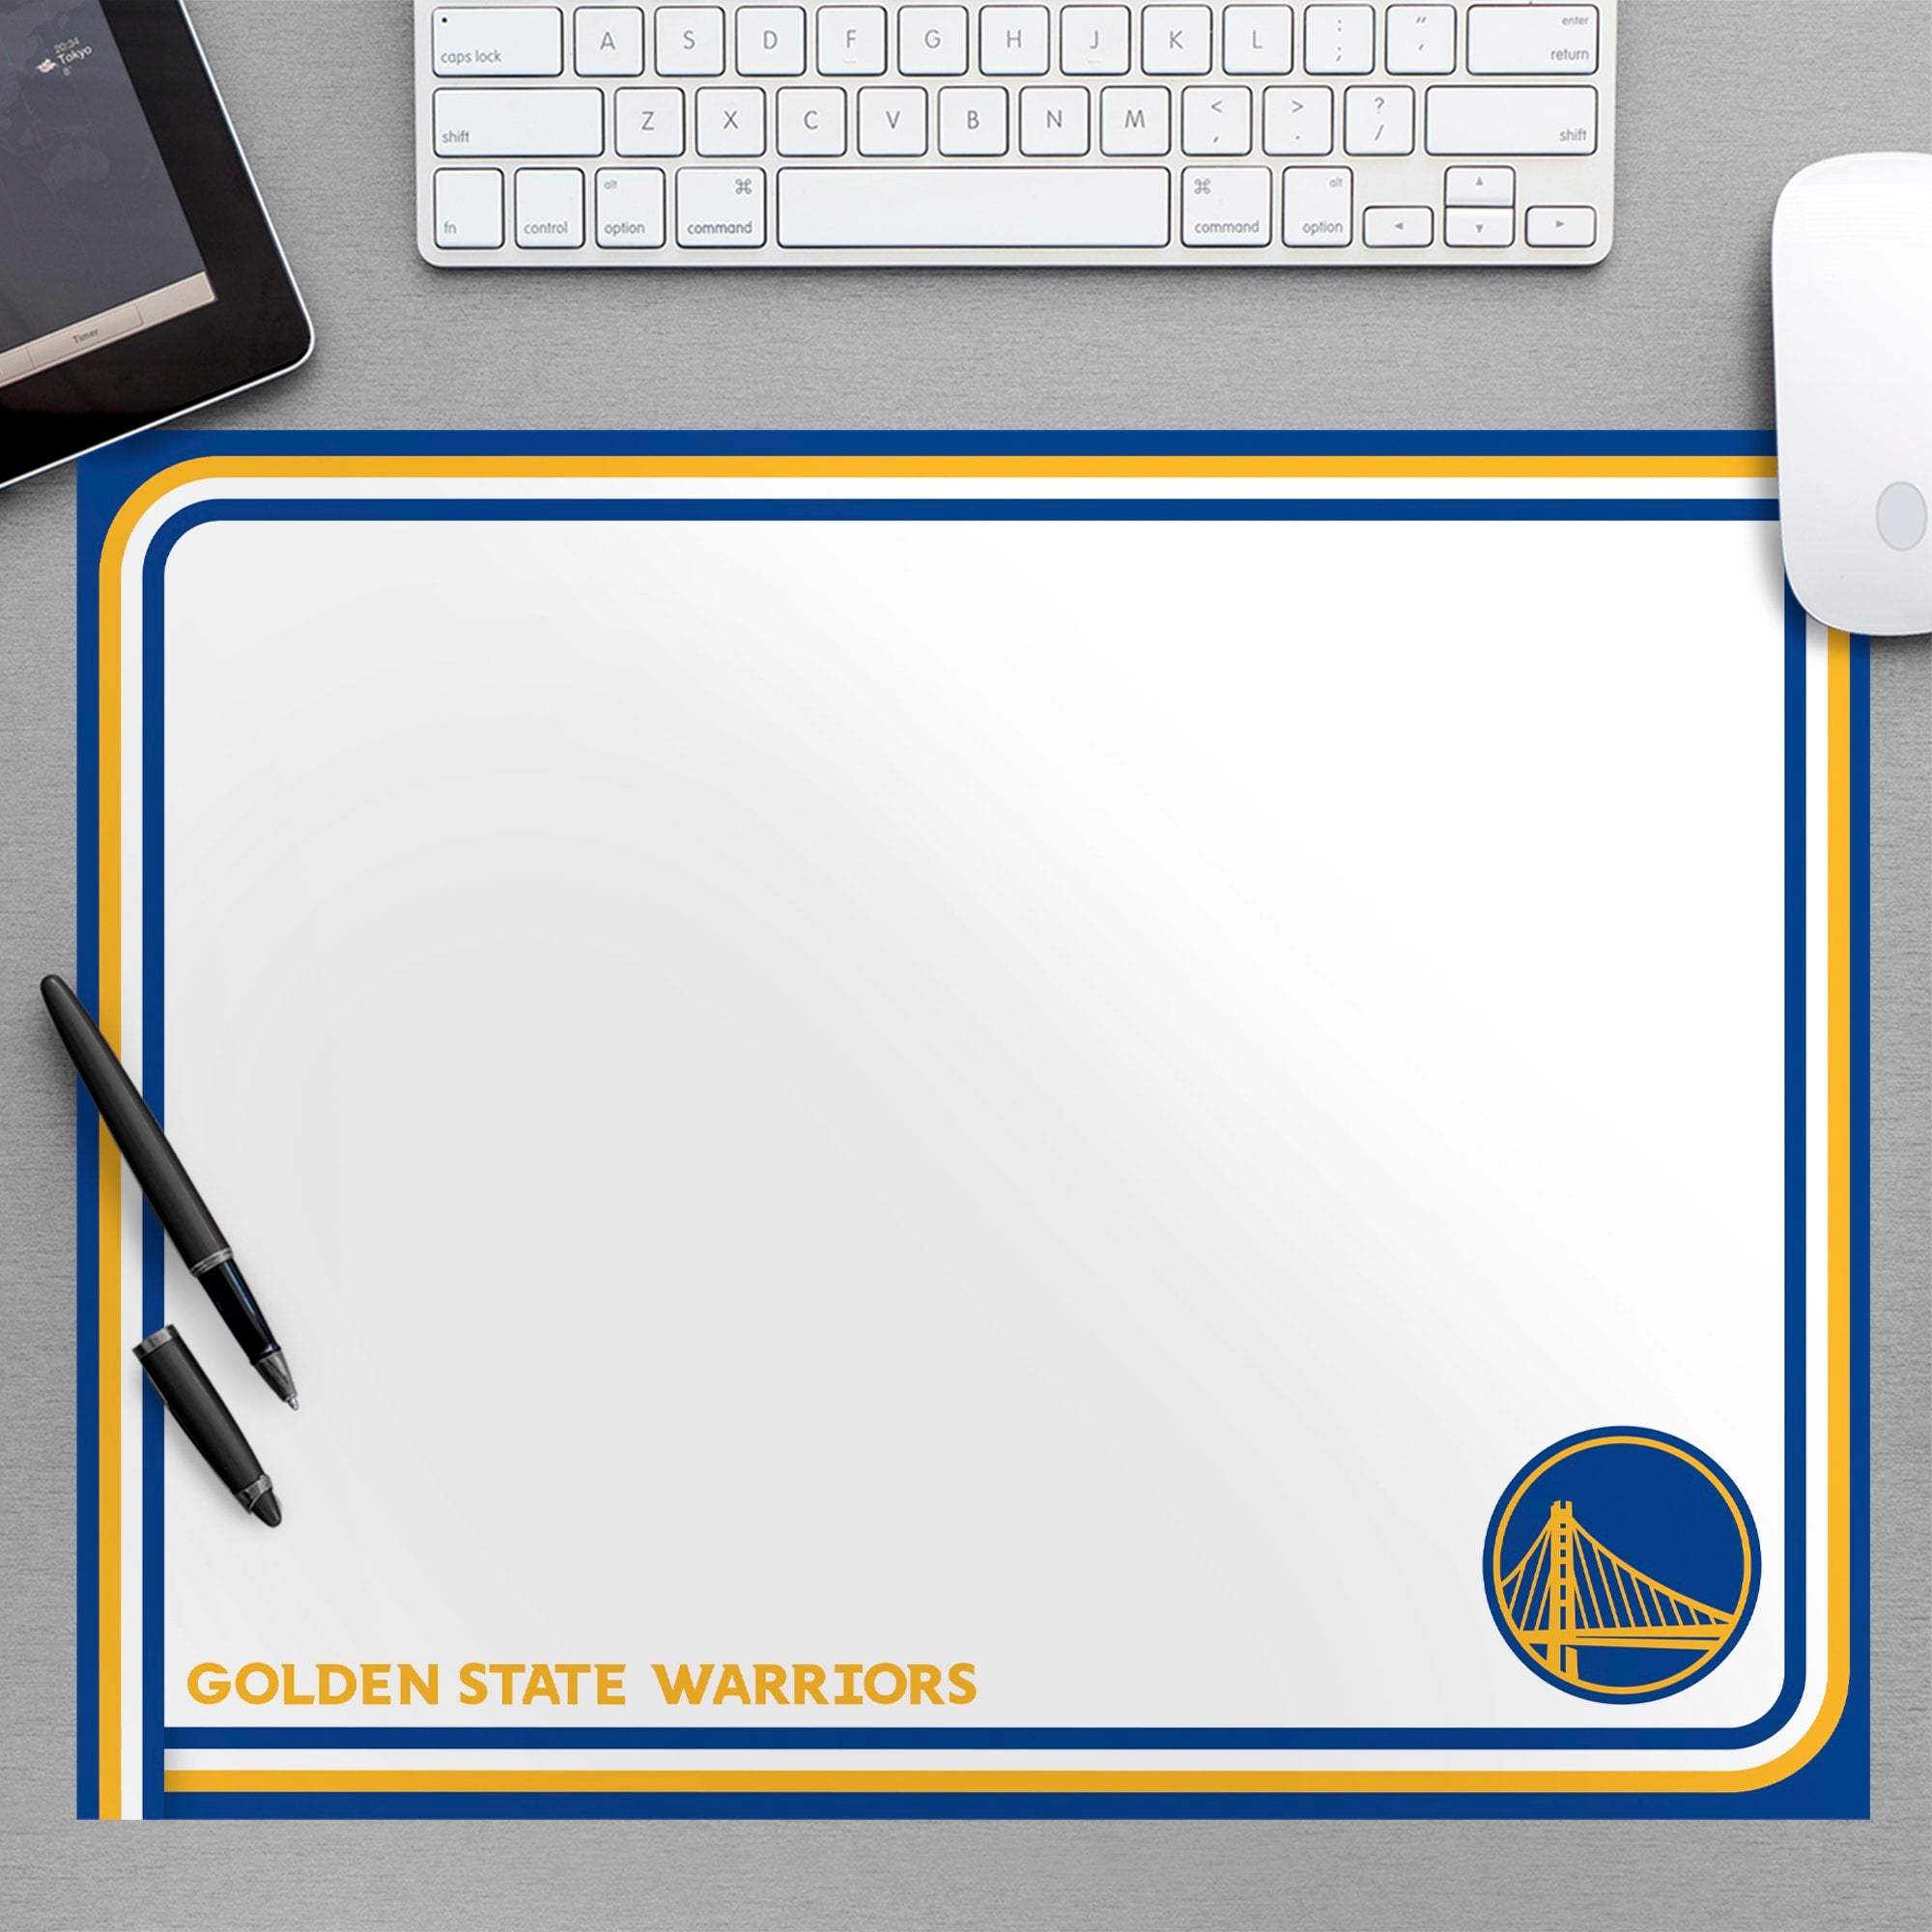 Golden State Warriors for Golden State Warriors: Dry Erase Whiteboard - Officially Licensed NBA Removable Wall Decal Large by Fa